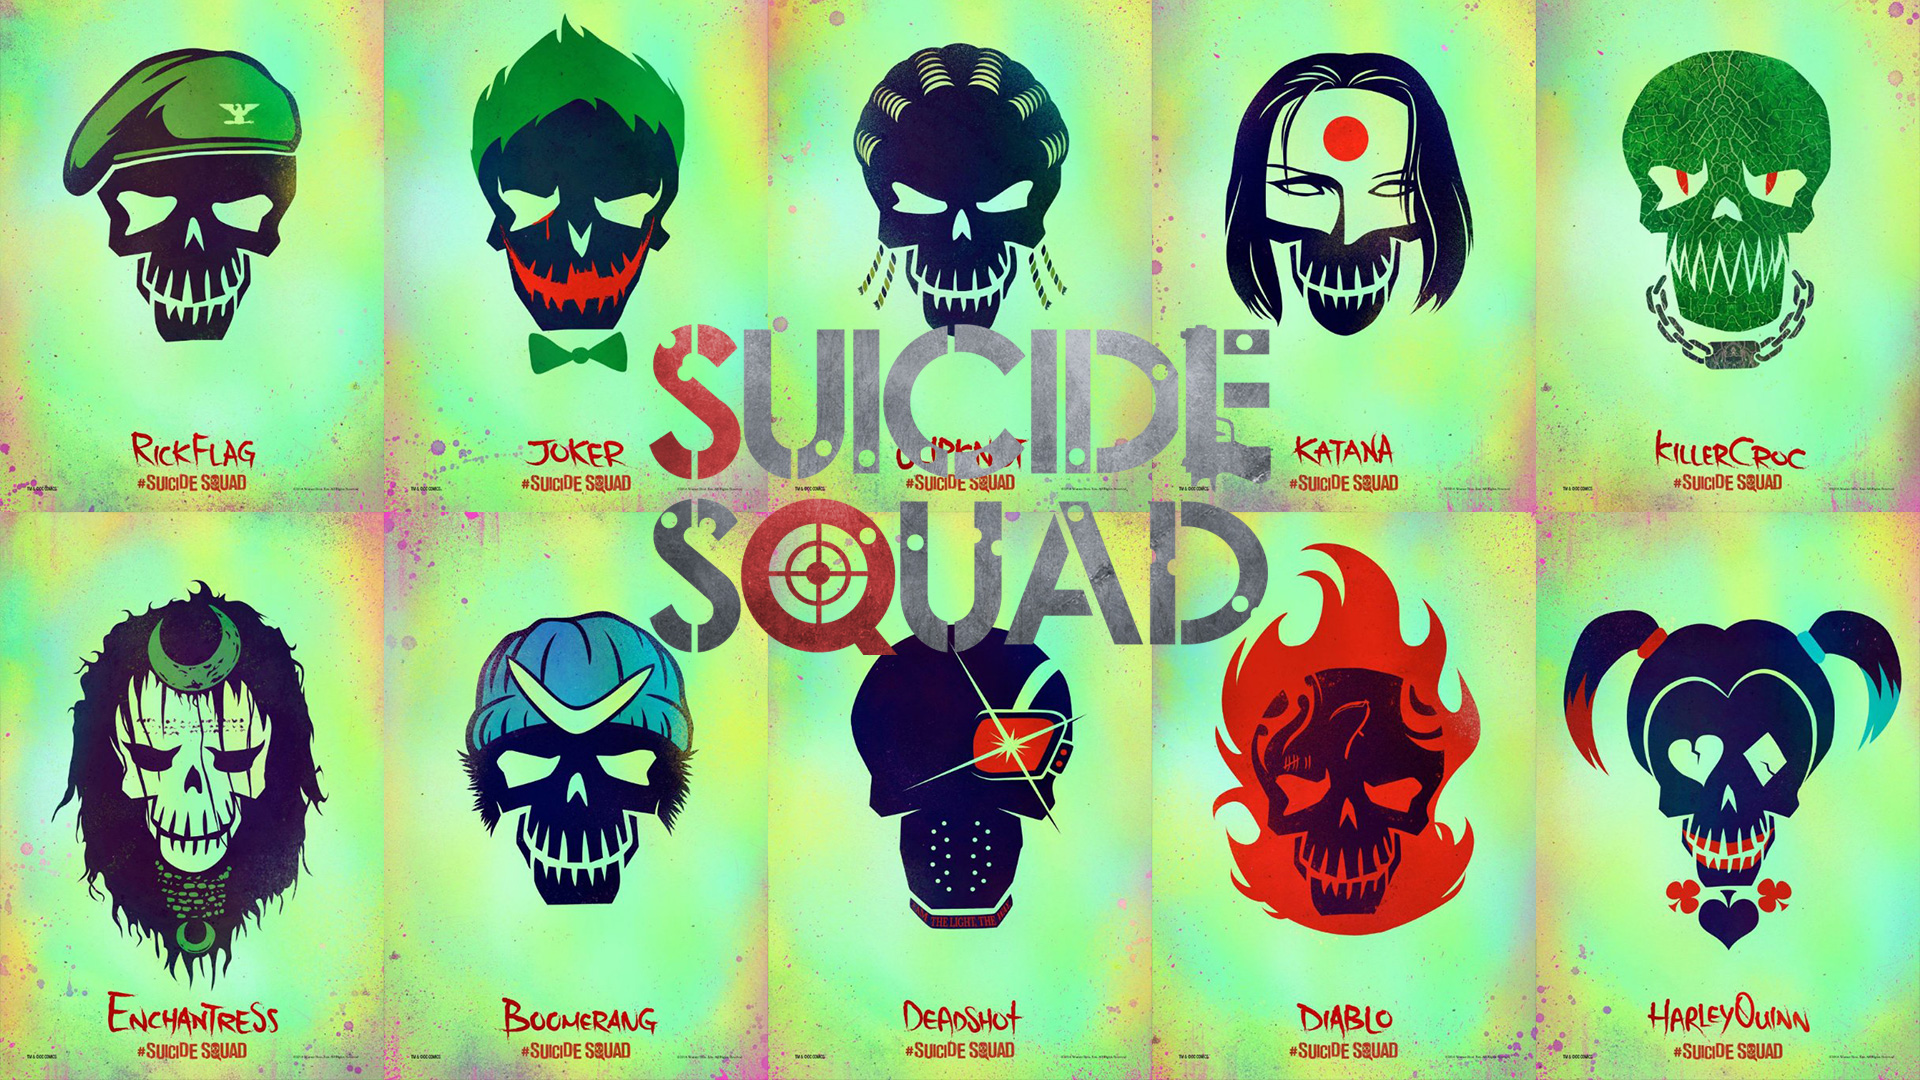 Suicide Squad movie wallpaper hd Free HD Wallpapers Images Stock